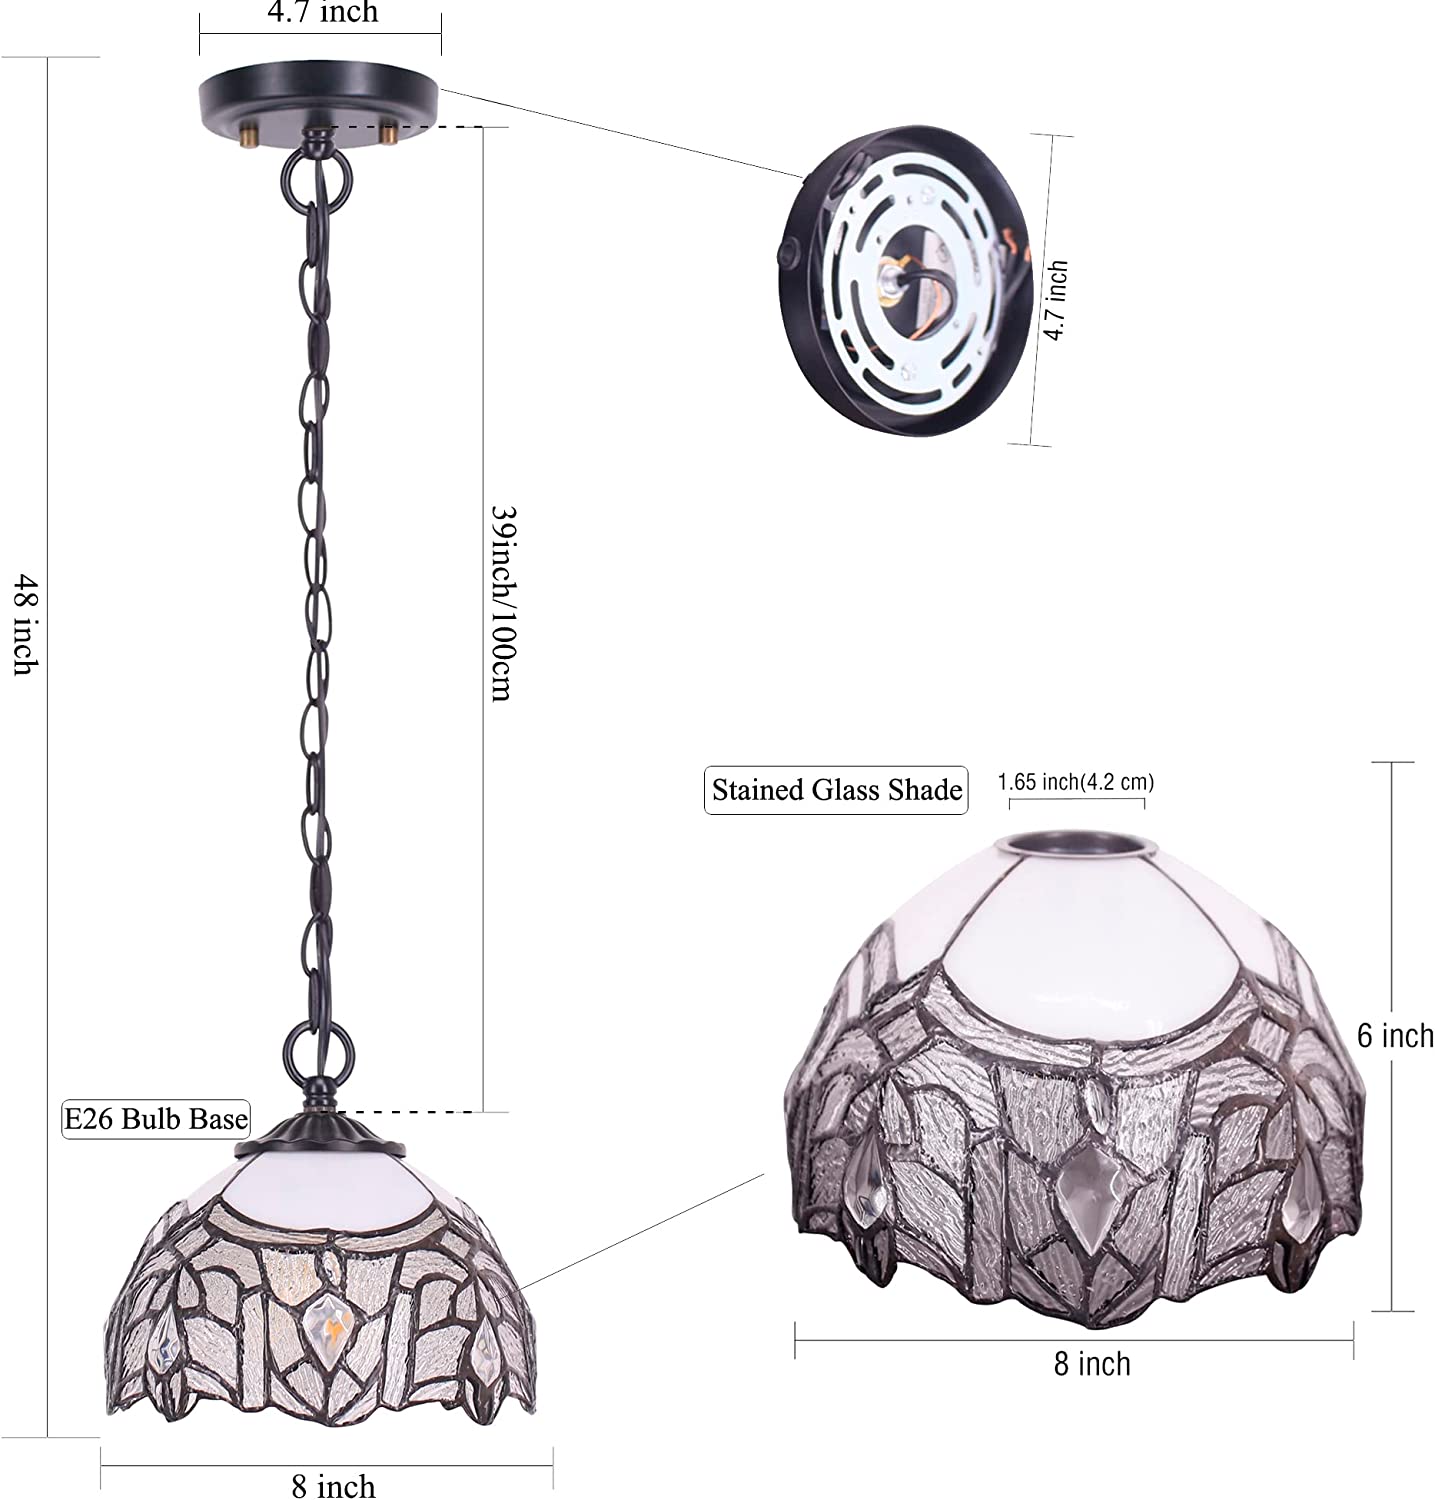 Werfactory® Tiffany Pendant Lighting White Stained Glass Crystal Hanging Lamp